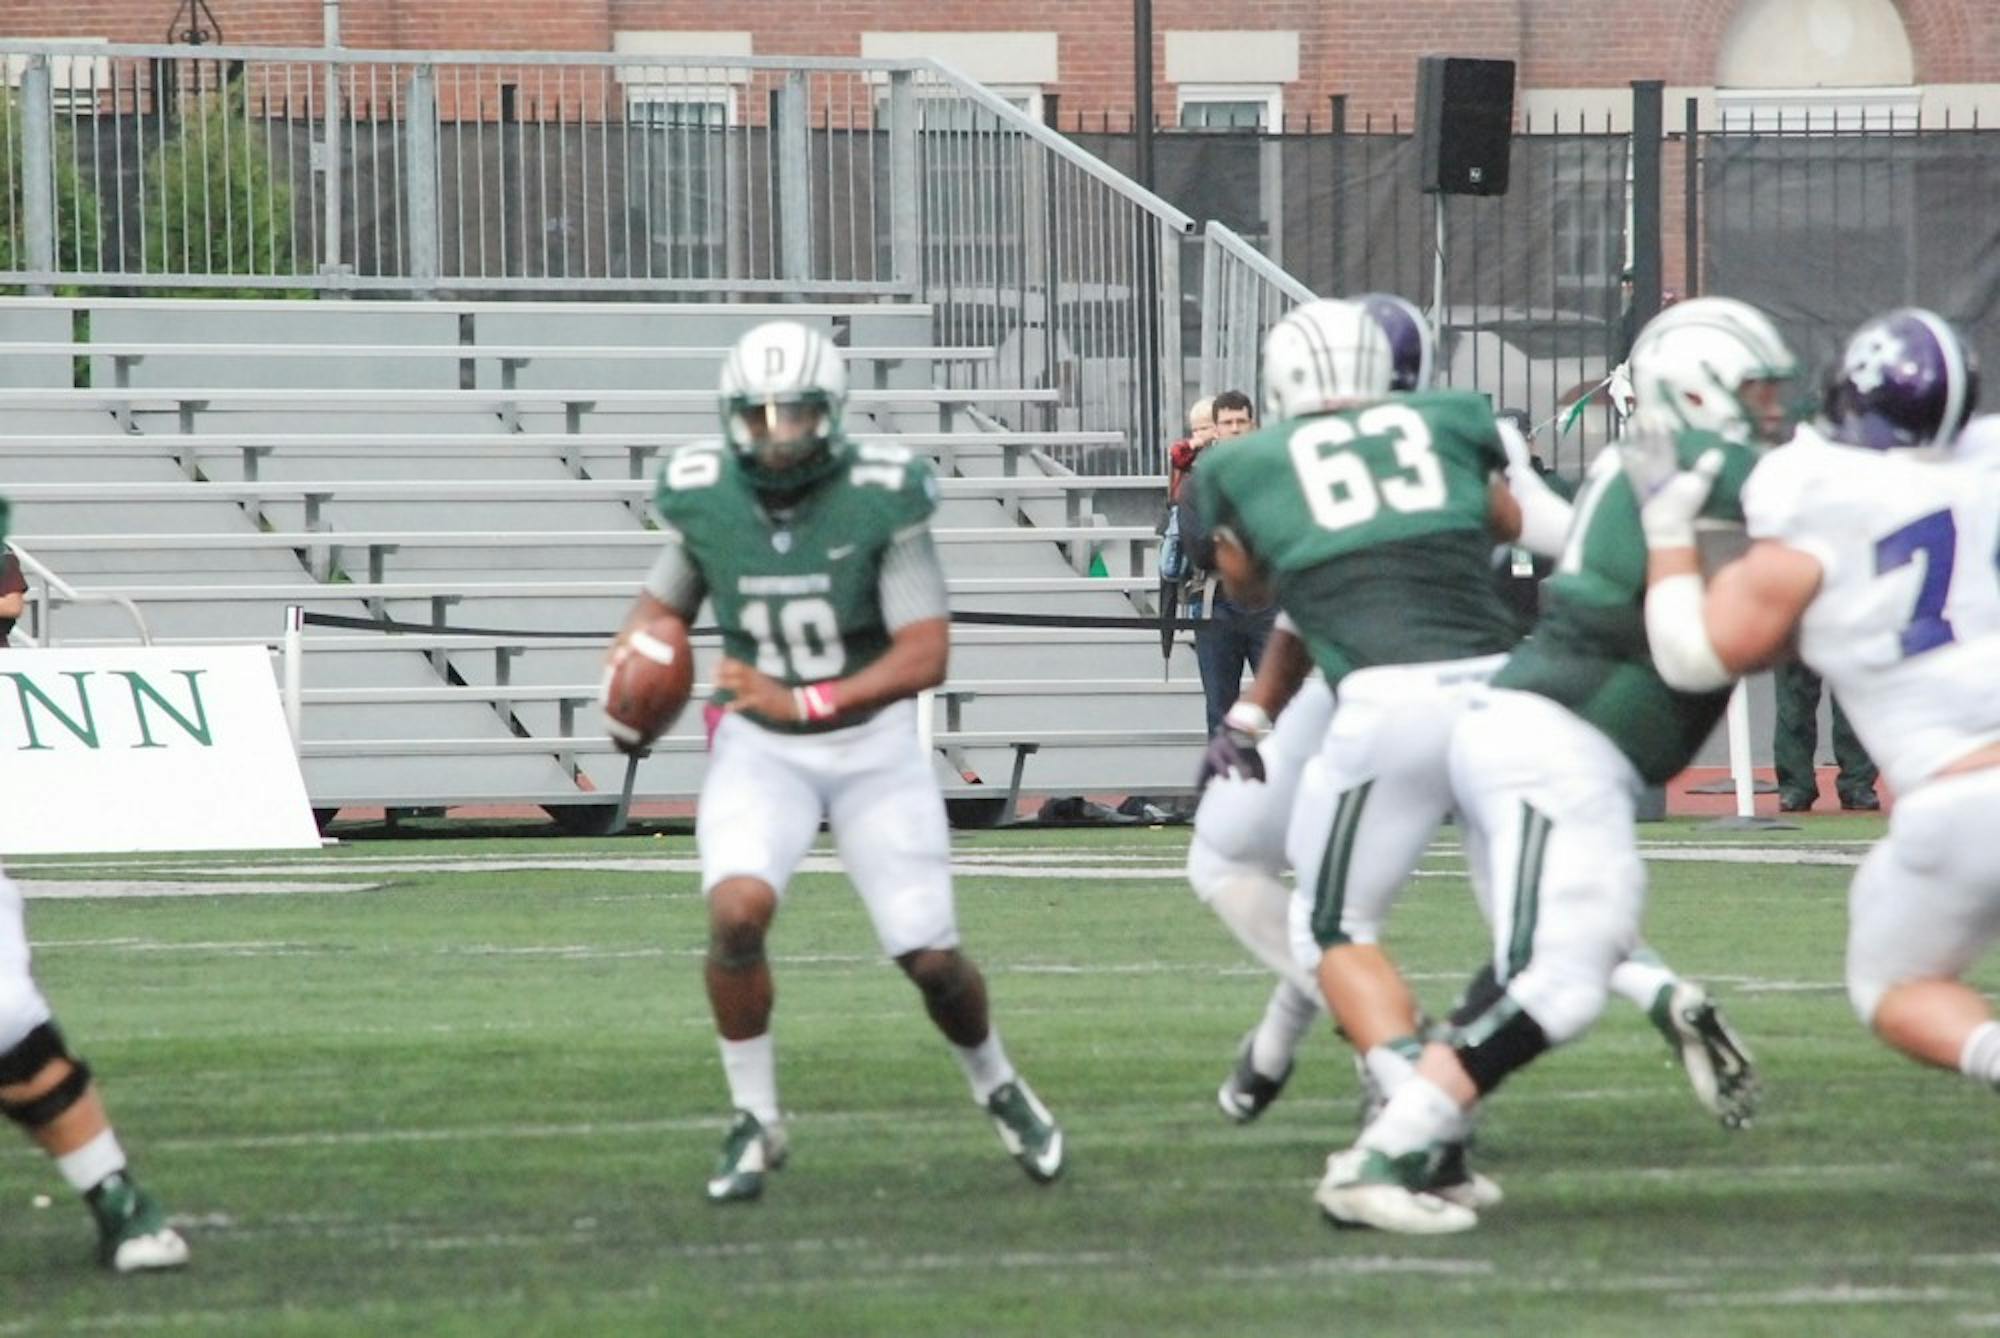 Jacob Flores '16, wearing number 63, signed with the Green Bay Packers this spring.